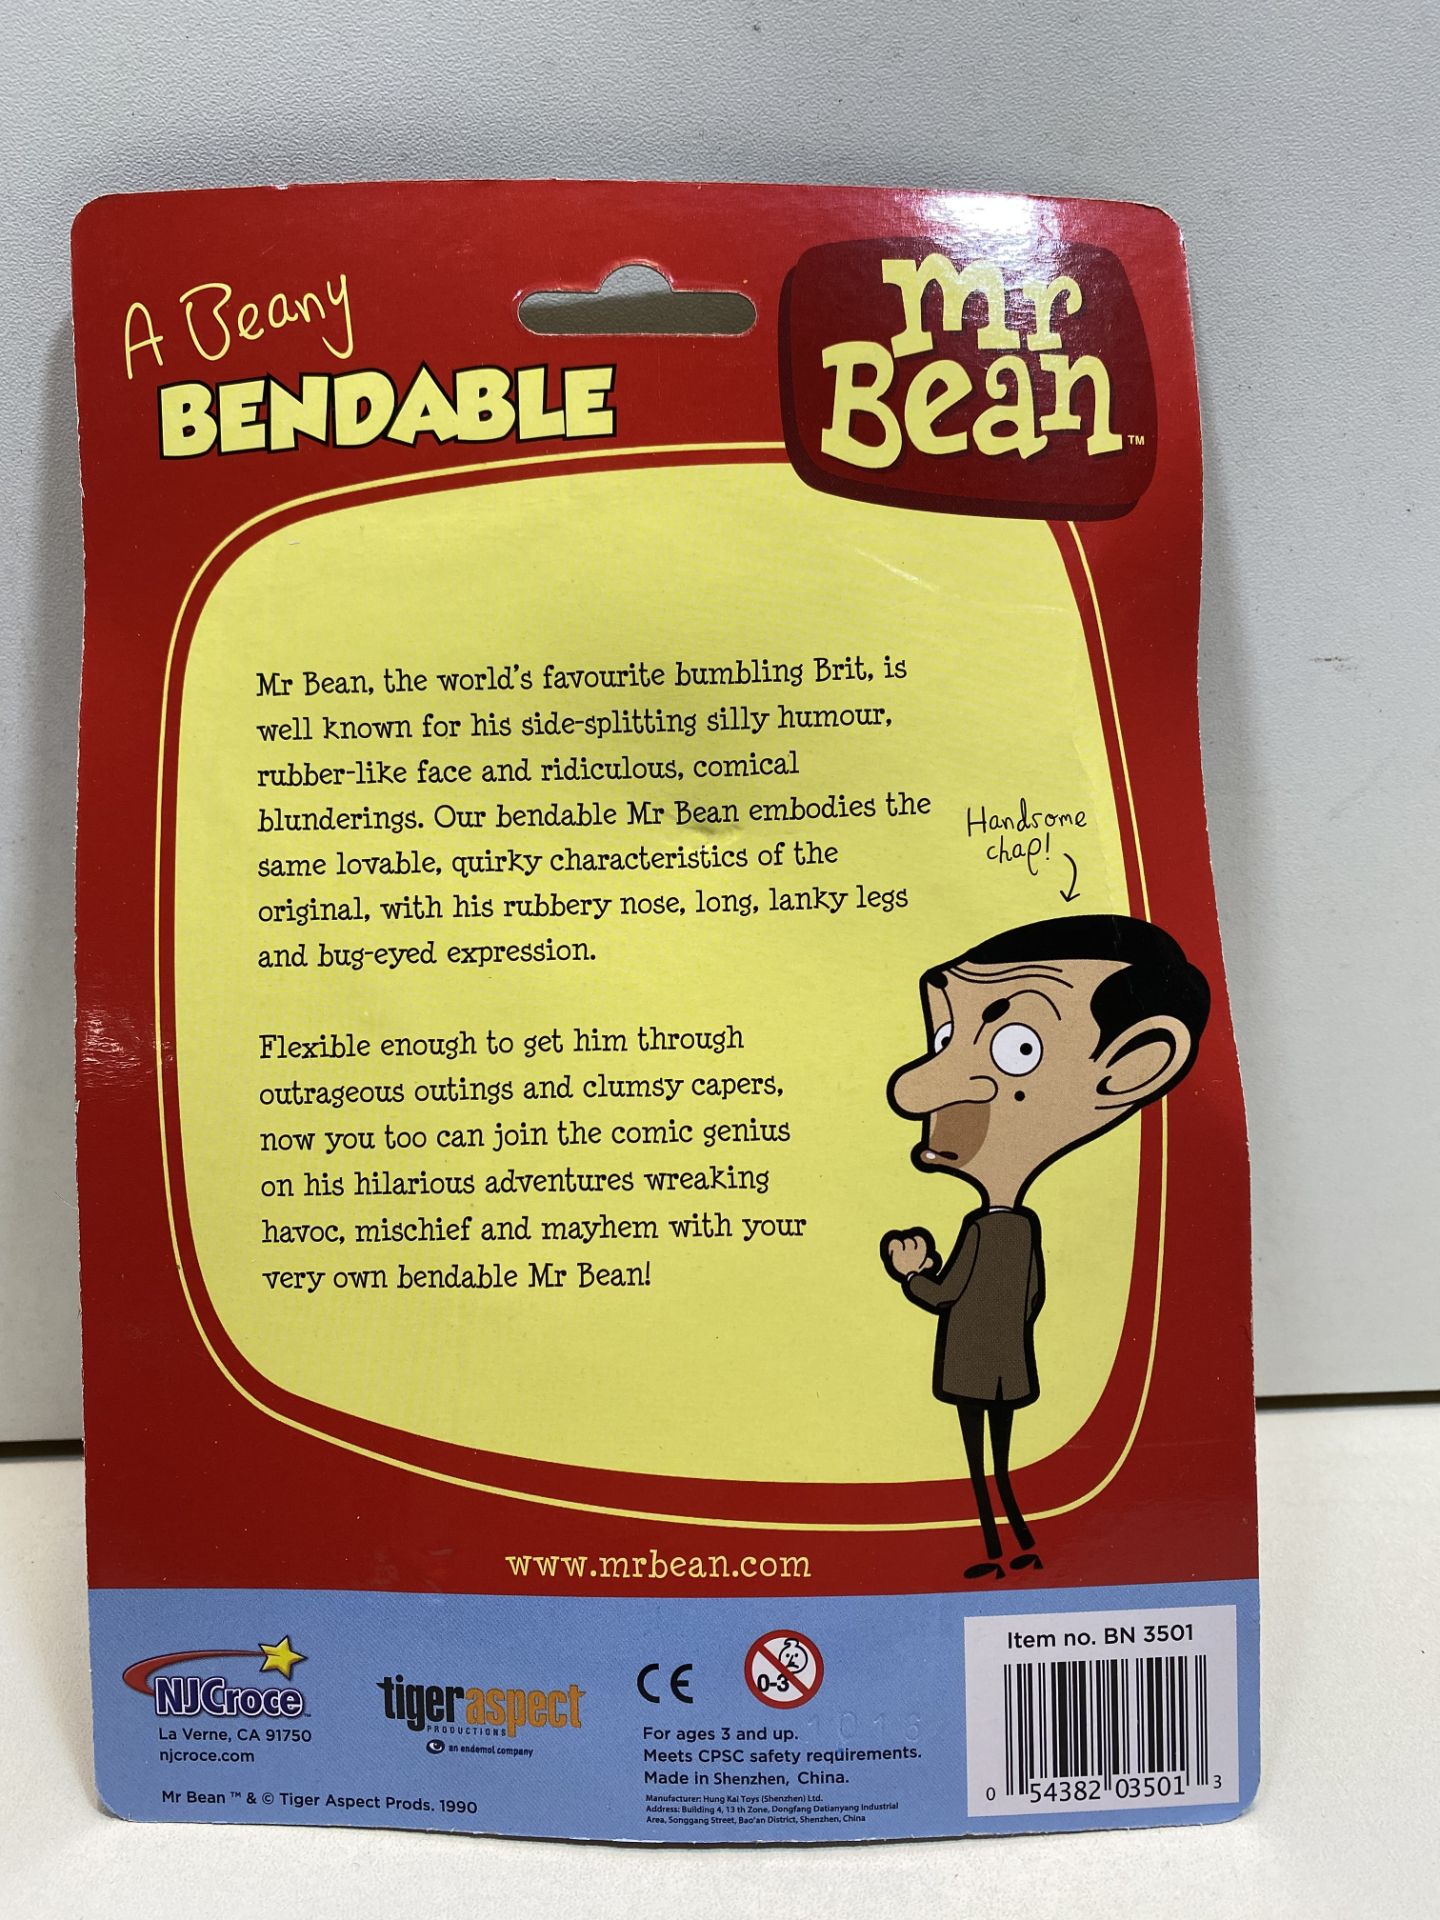 12 x 1990 NJCROCE MR BEAN BENDABLE - POSEABLE FIGURE NEW IN BLISTER PACK | 54382035013 - Image 4 of 4